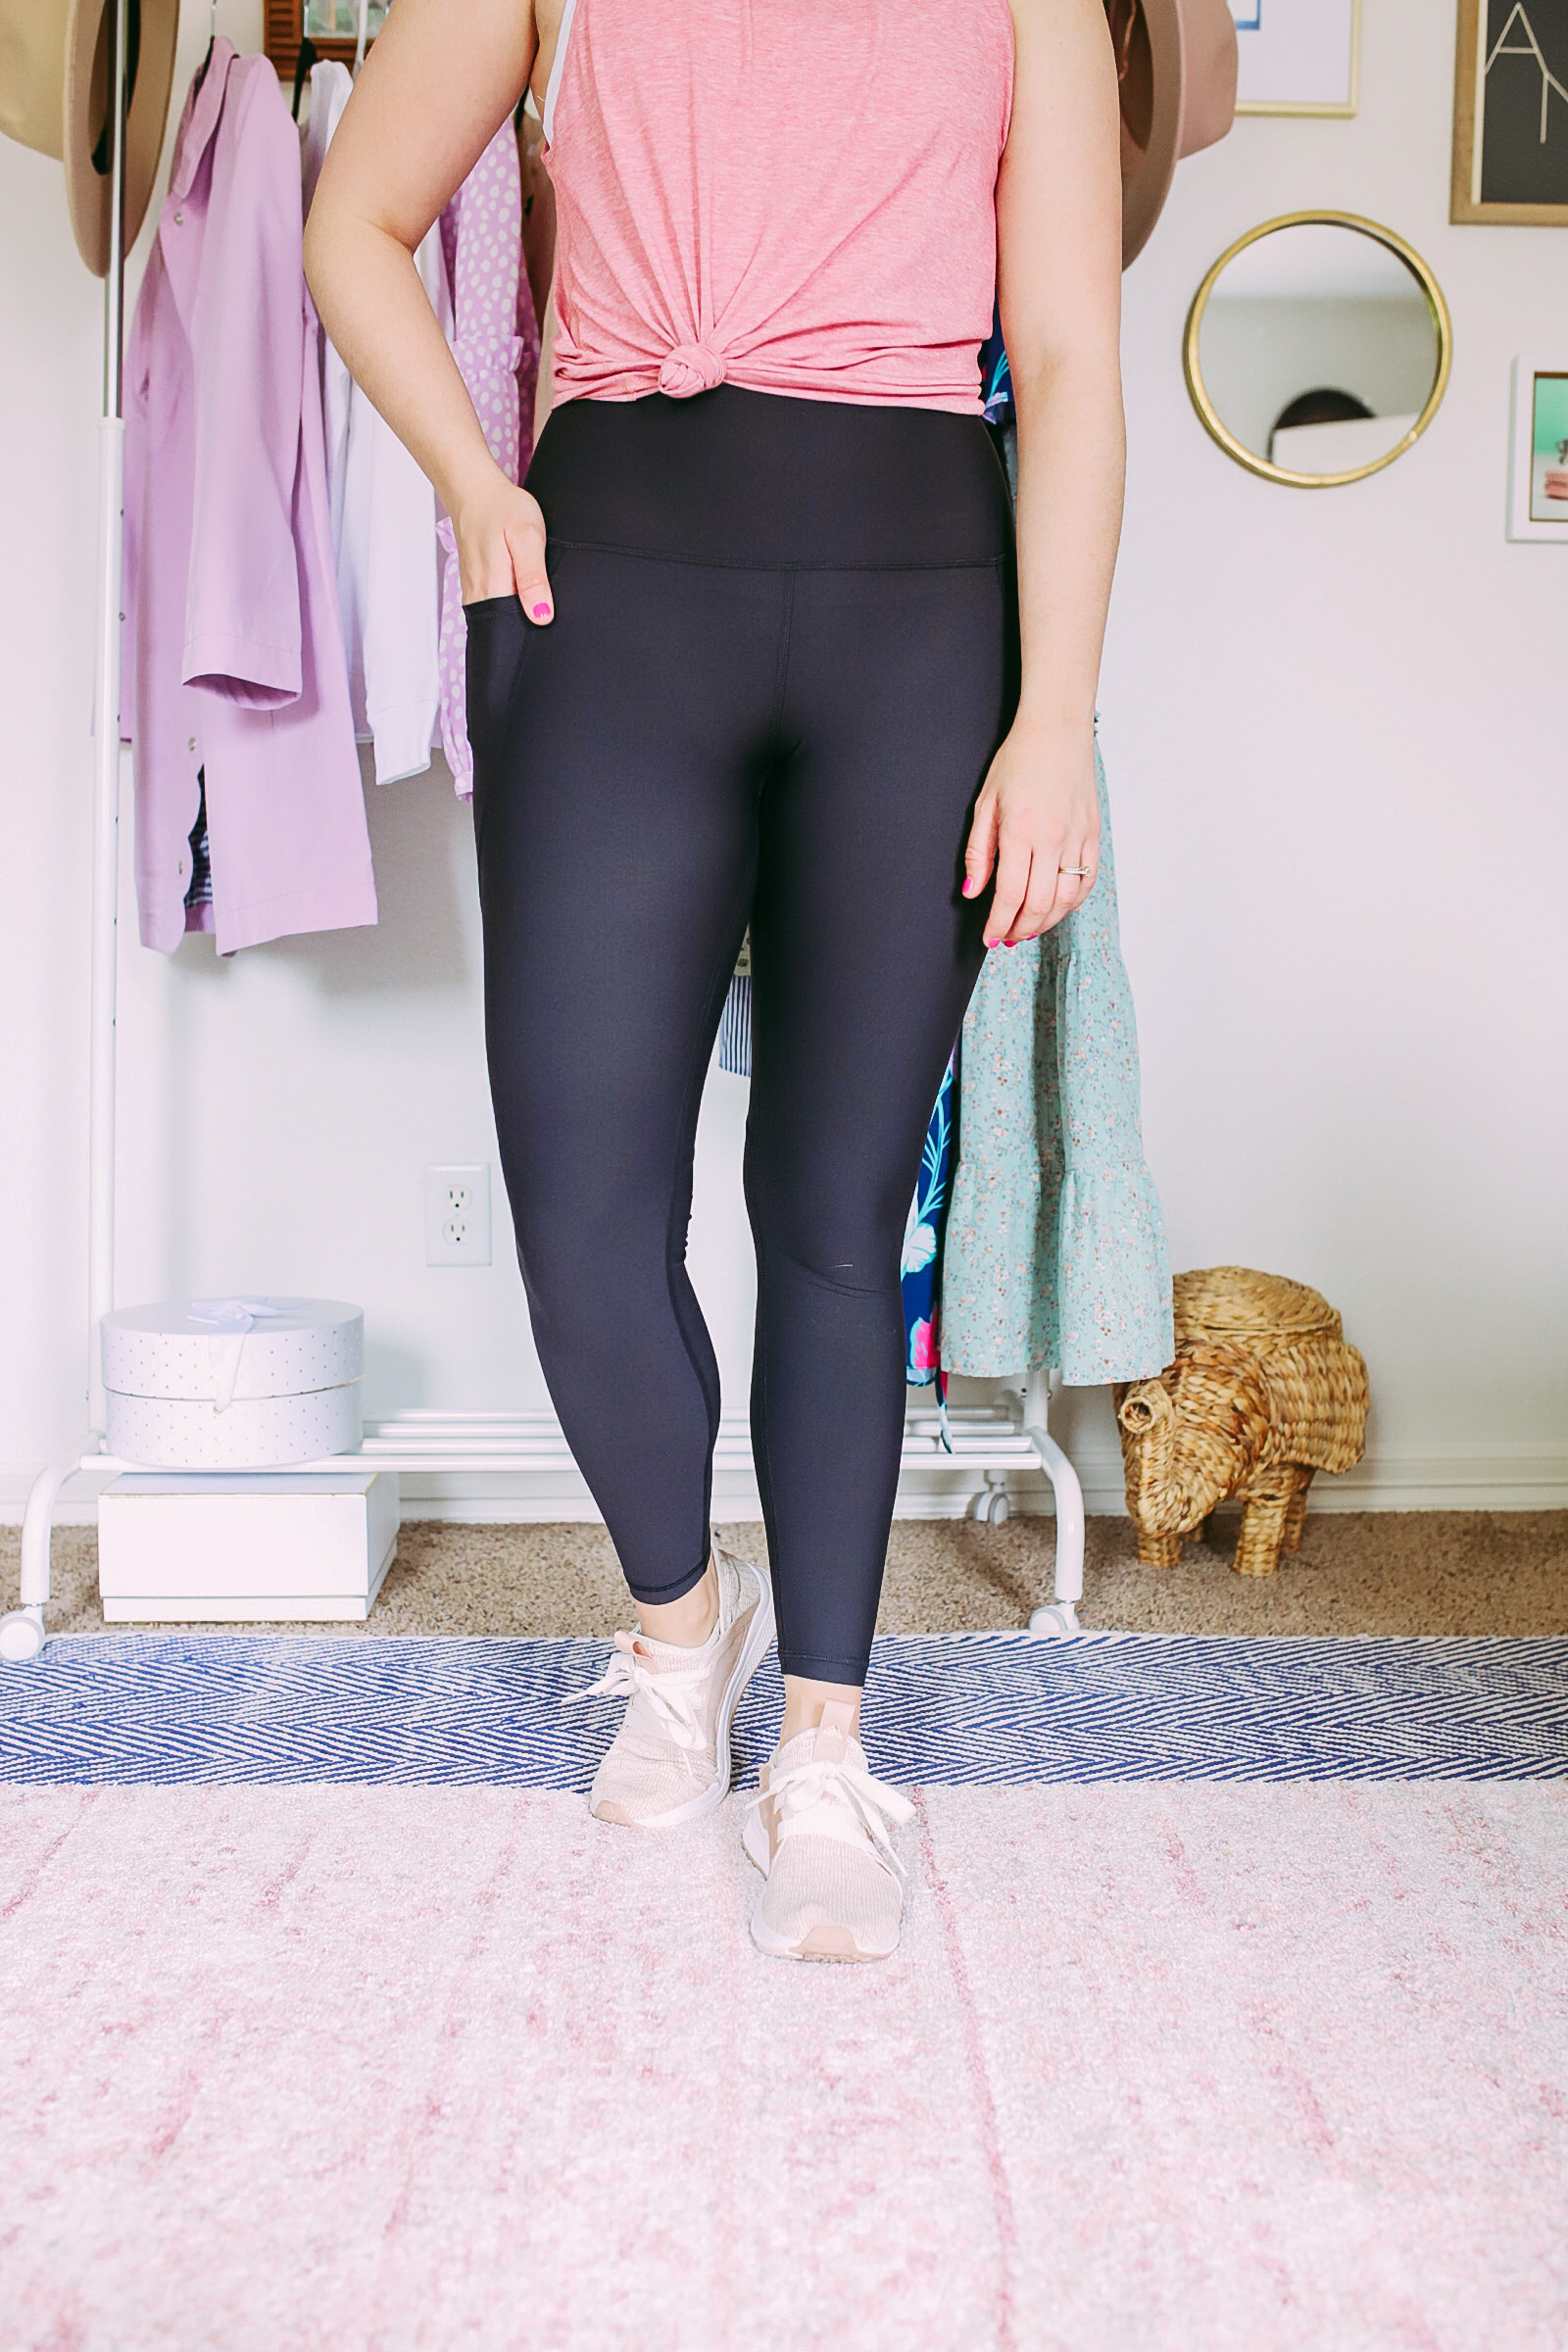 Obsessed' shoppers compare 'buttery soft' activewear leggings to pair by  coveted brand Lululemon